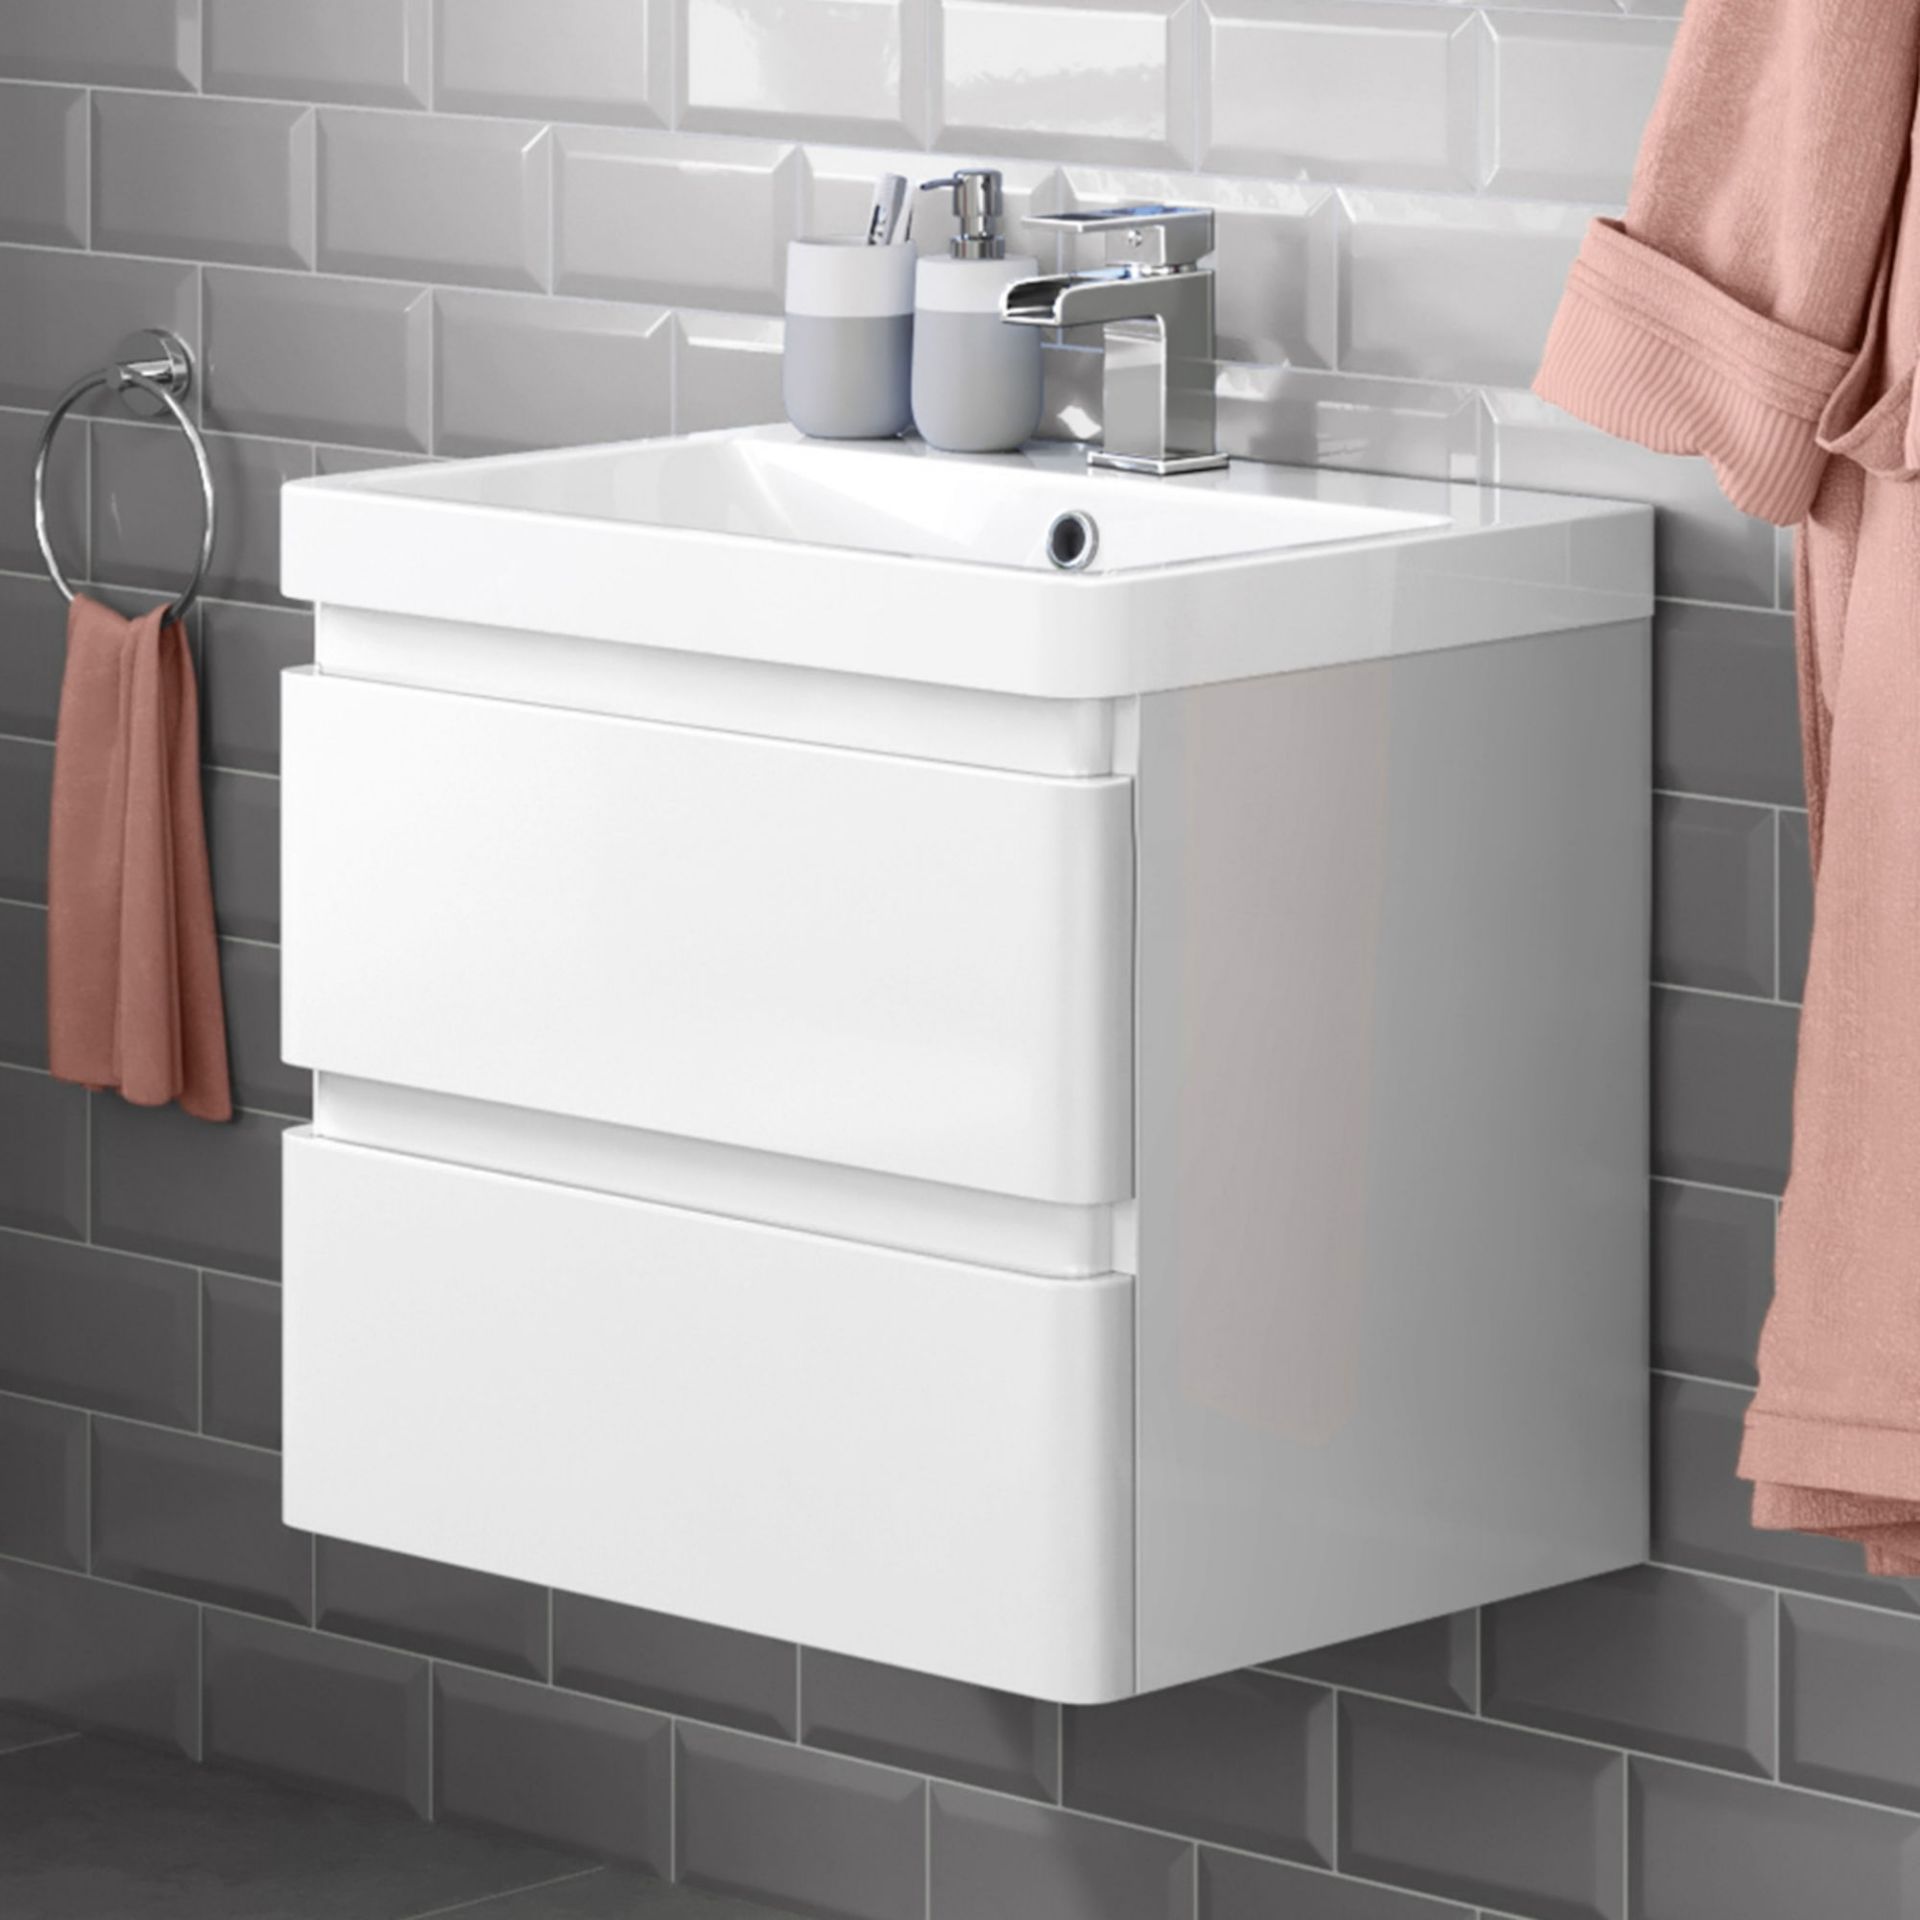 (RK31) 600mm Denver Gloss White Built In Sink Drawer Unit - Wall Hung. RRP £499.99. Comes comp...